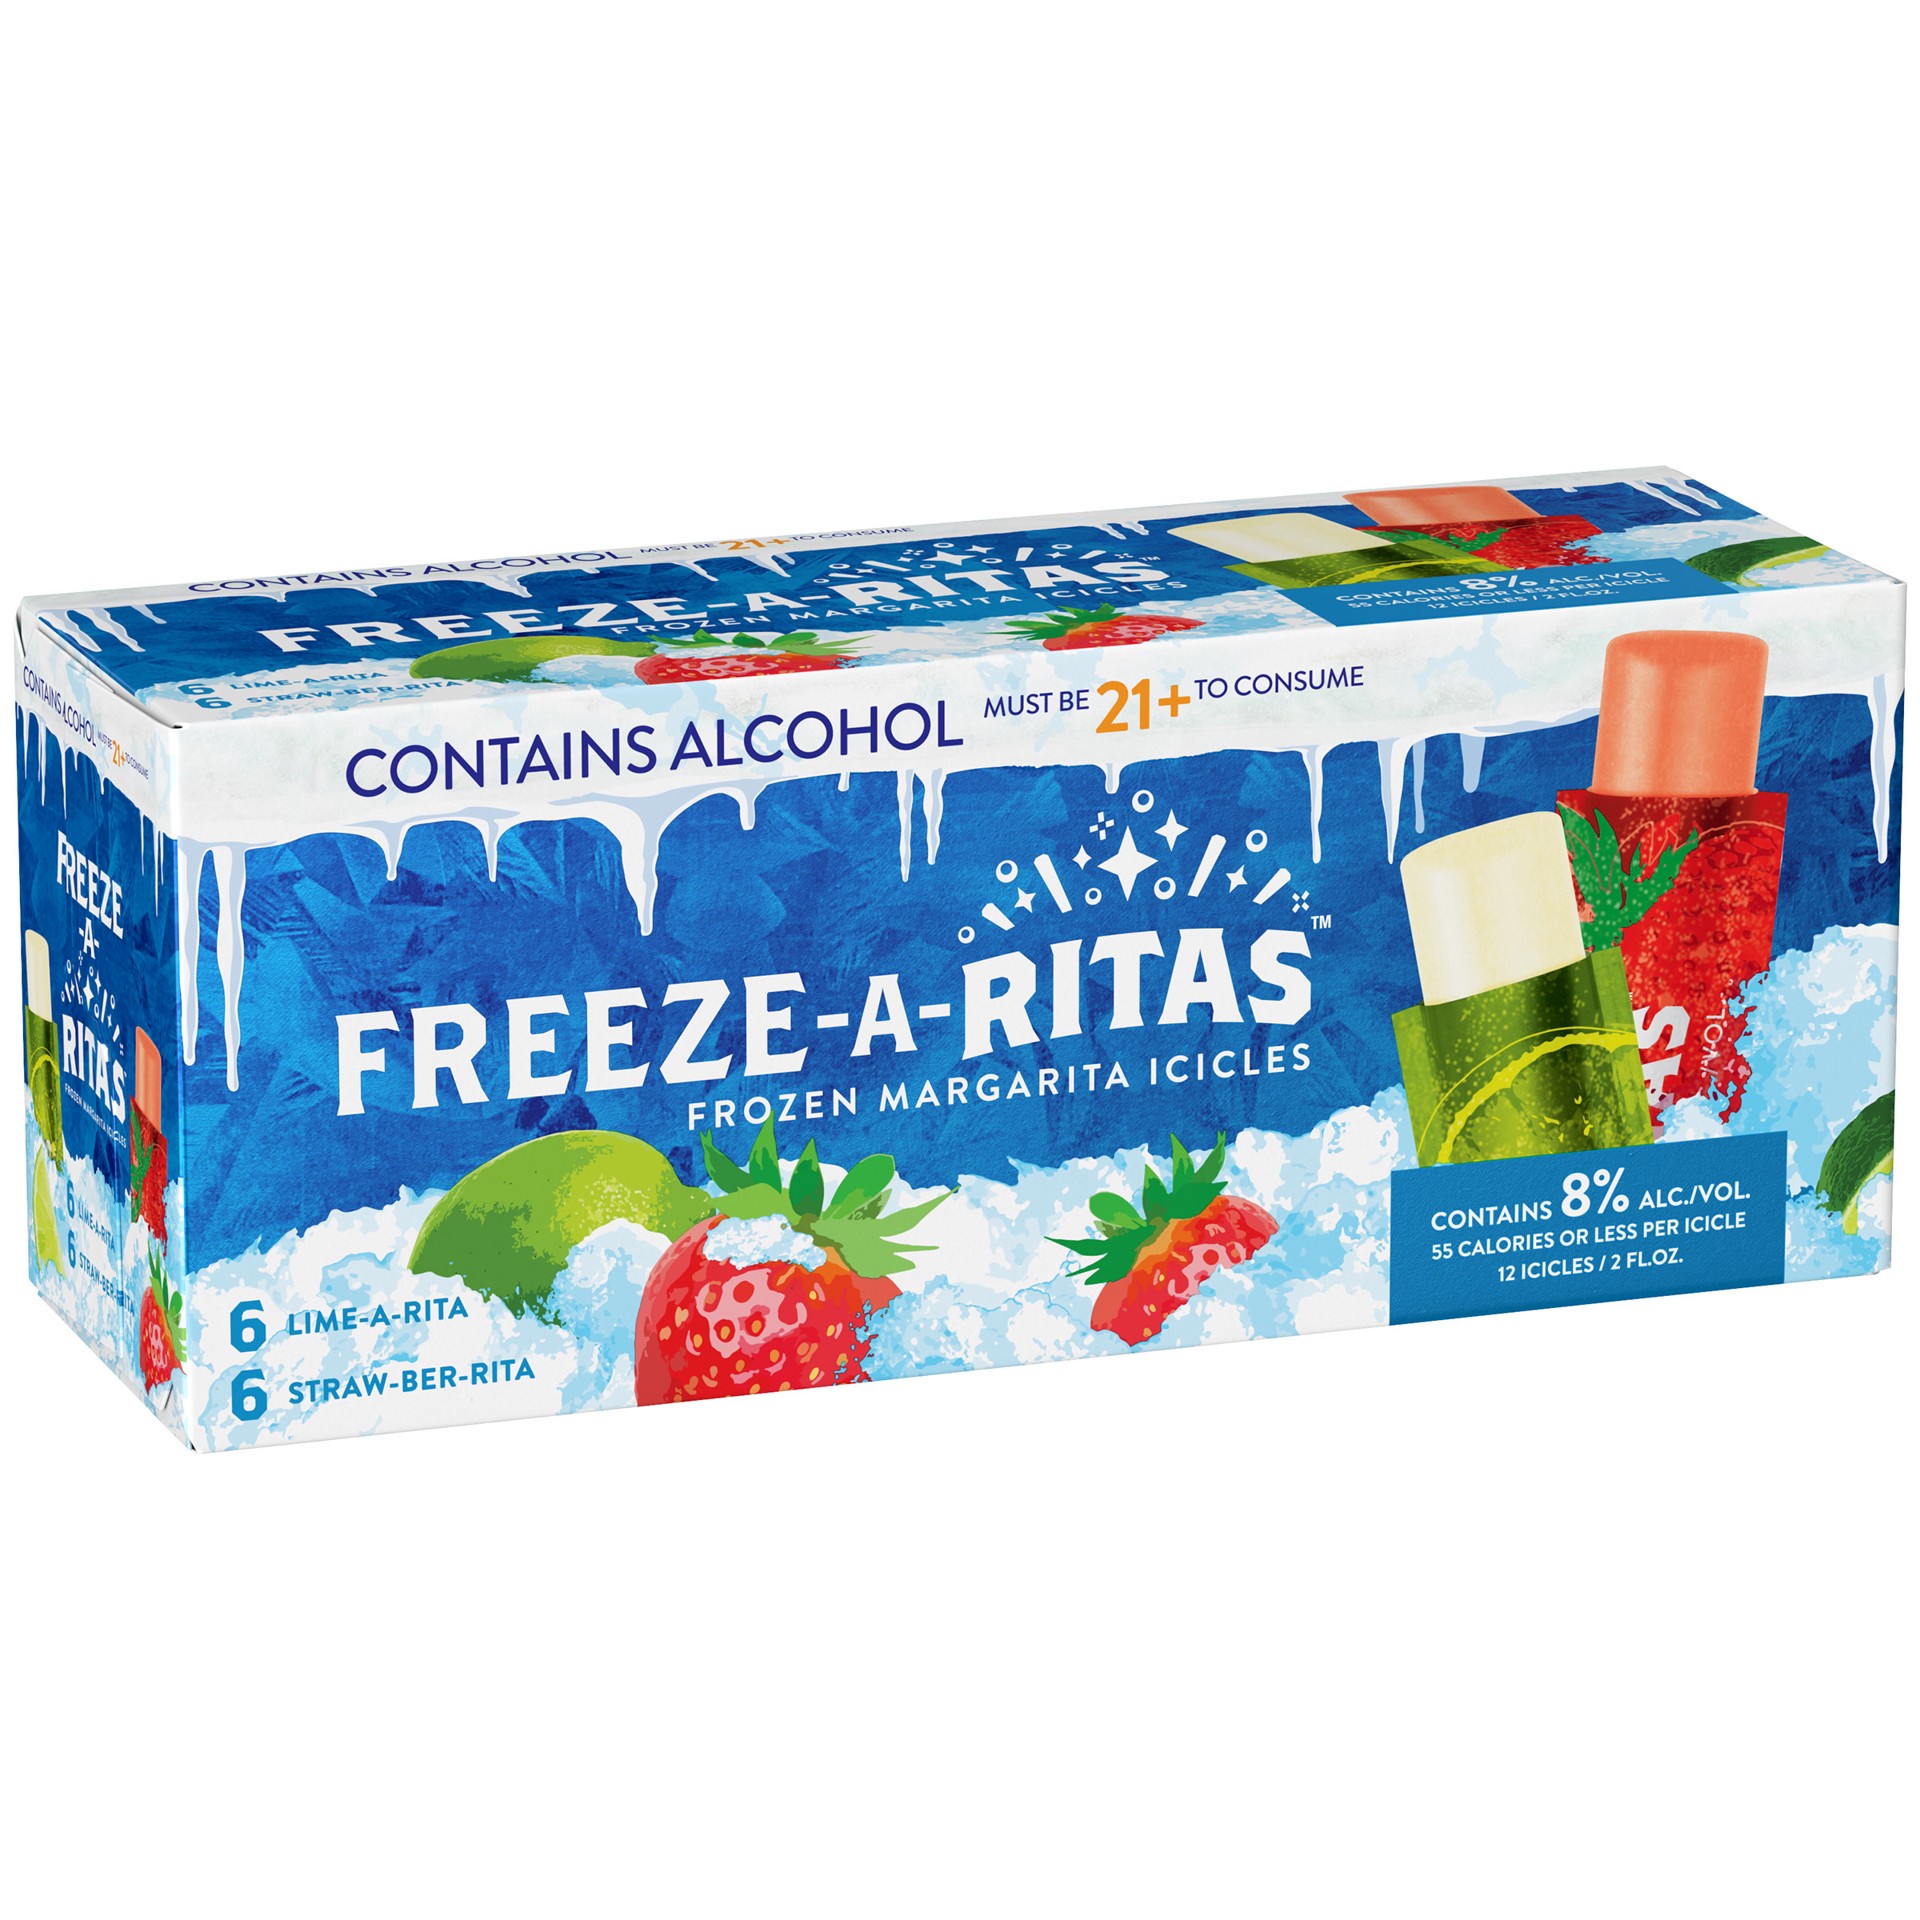 slide 1 of 3, Freeze-A-Ritas Lime-A-Rita & Straw-Ber-Rita Frozen Margarita Icicles Variety Pack, 12 Pack 2 fl. oz. Pouches, 8% ABV, 12 ct